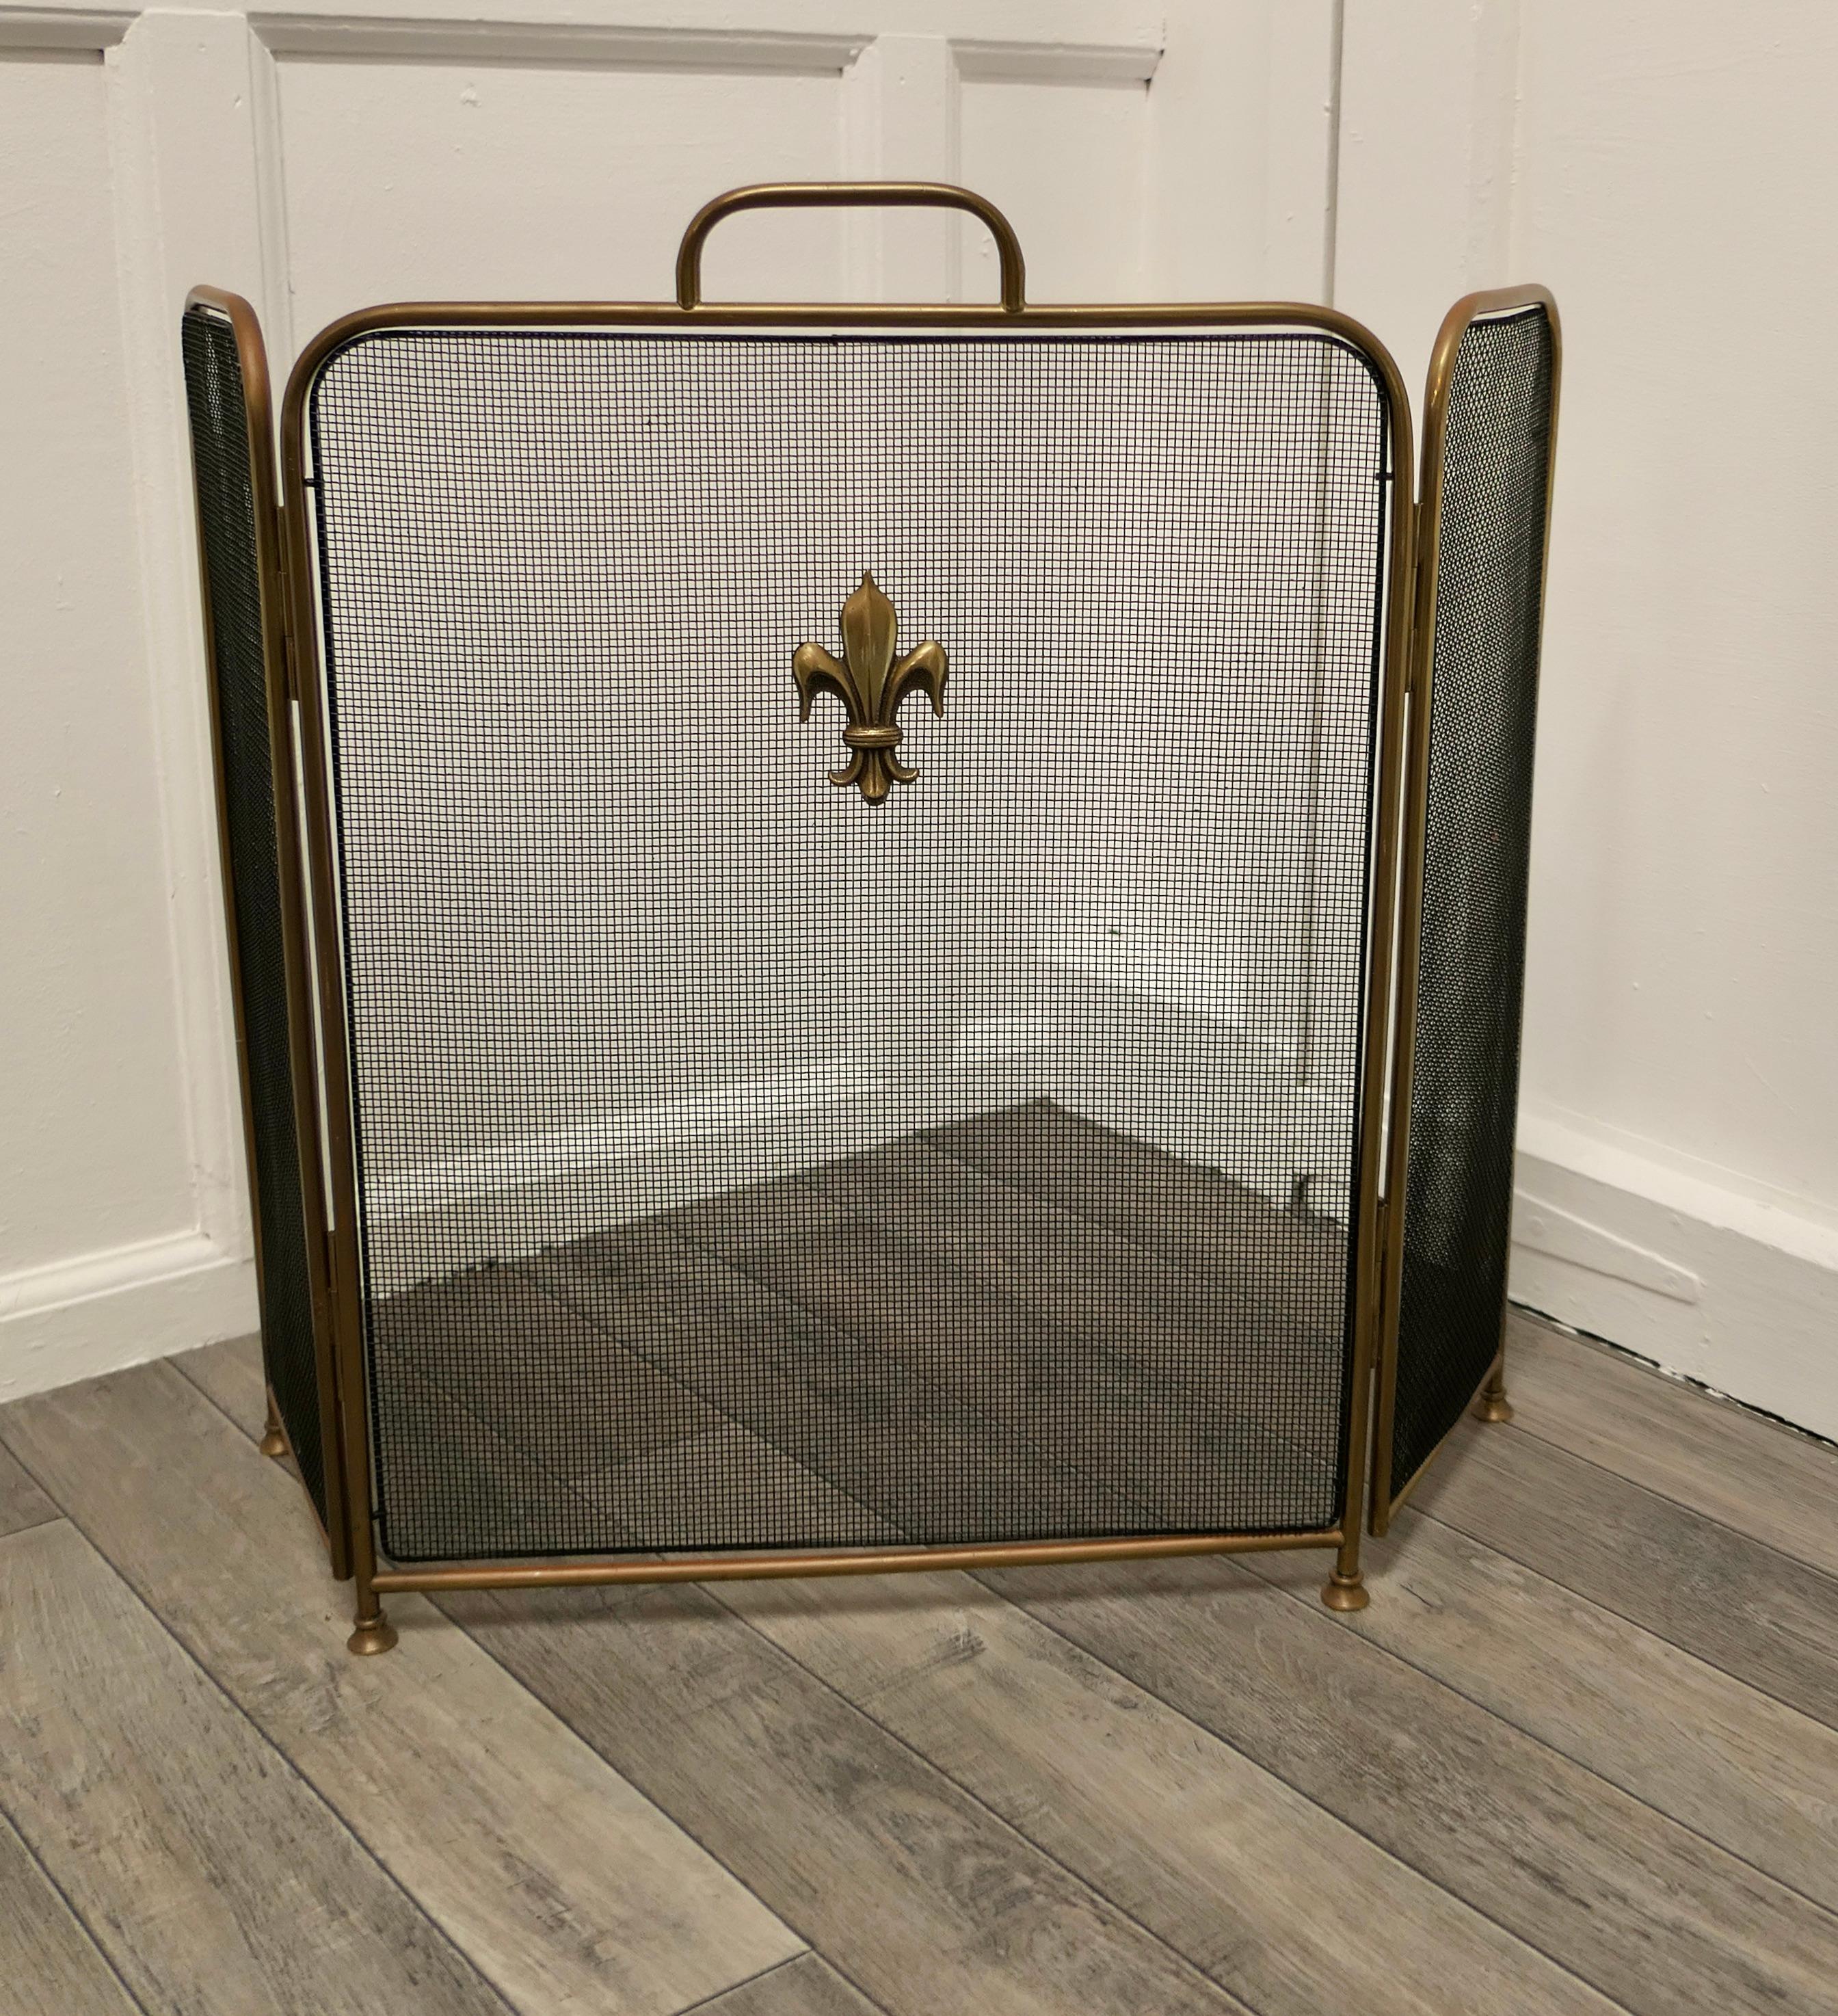 Victorian arts and crafts brass fire guard, spark screen

The Fire guard is a stylish good quality piece it is made in brass with a copper finish screen and has a “fleurs des lys decoration” at the centre
It has the added advantage that it folds